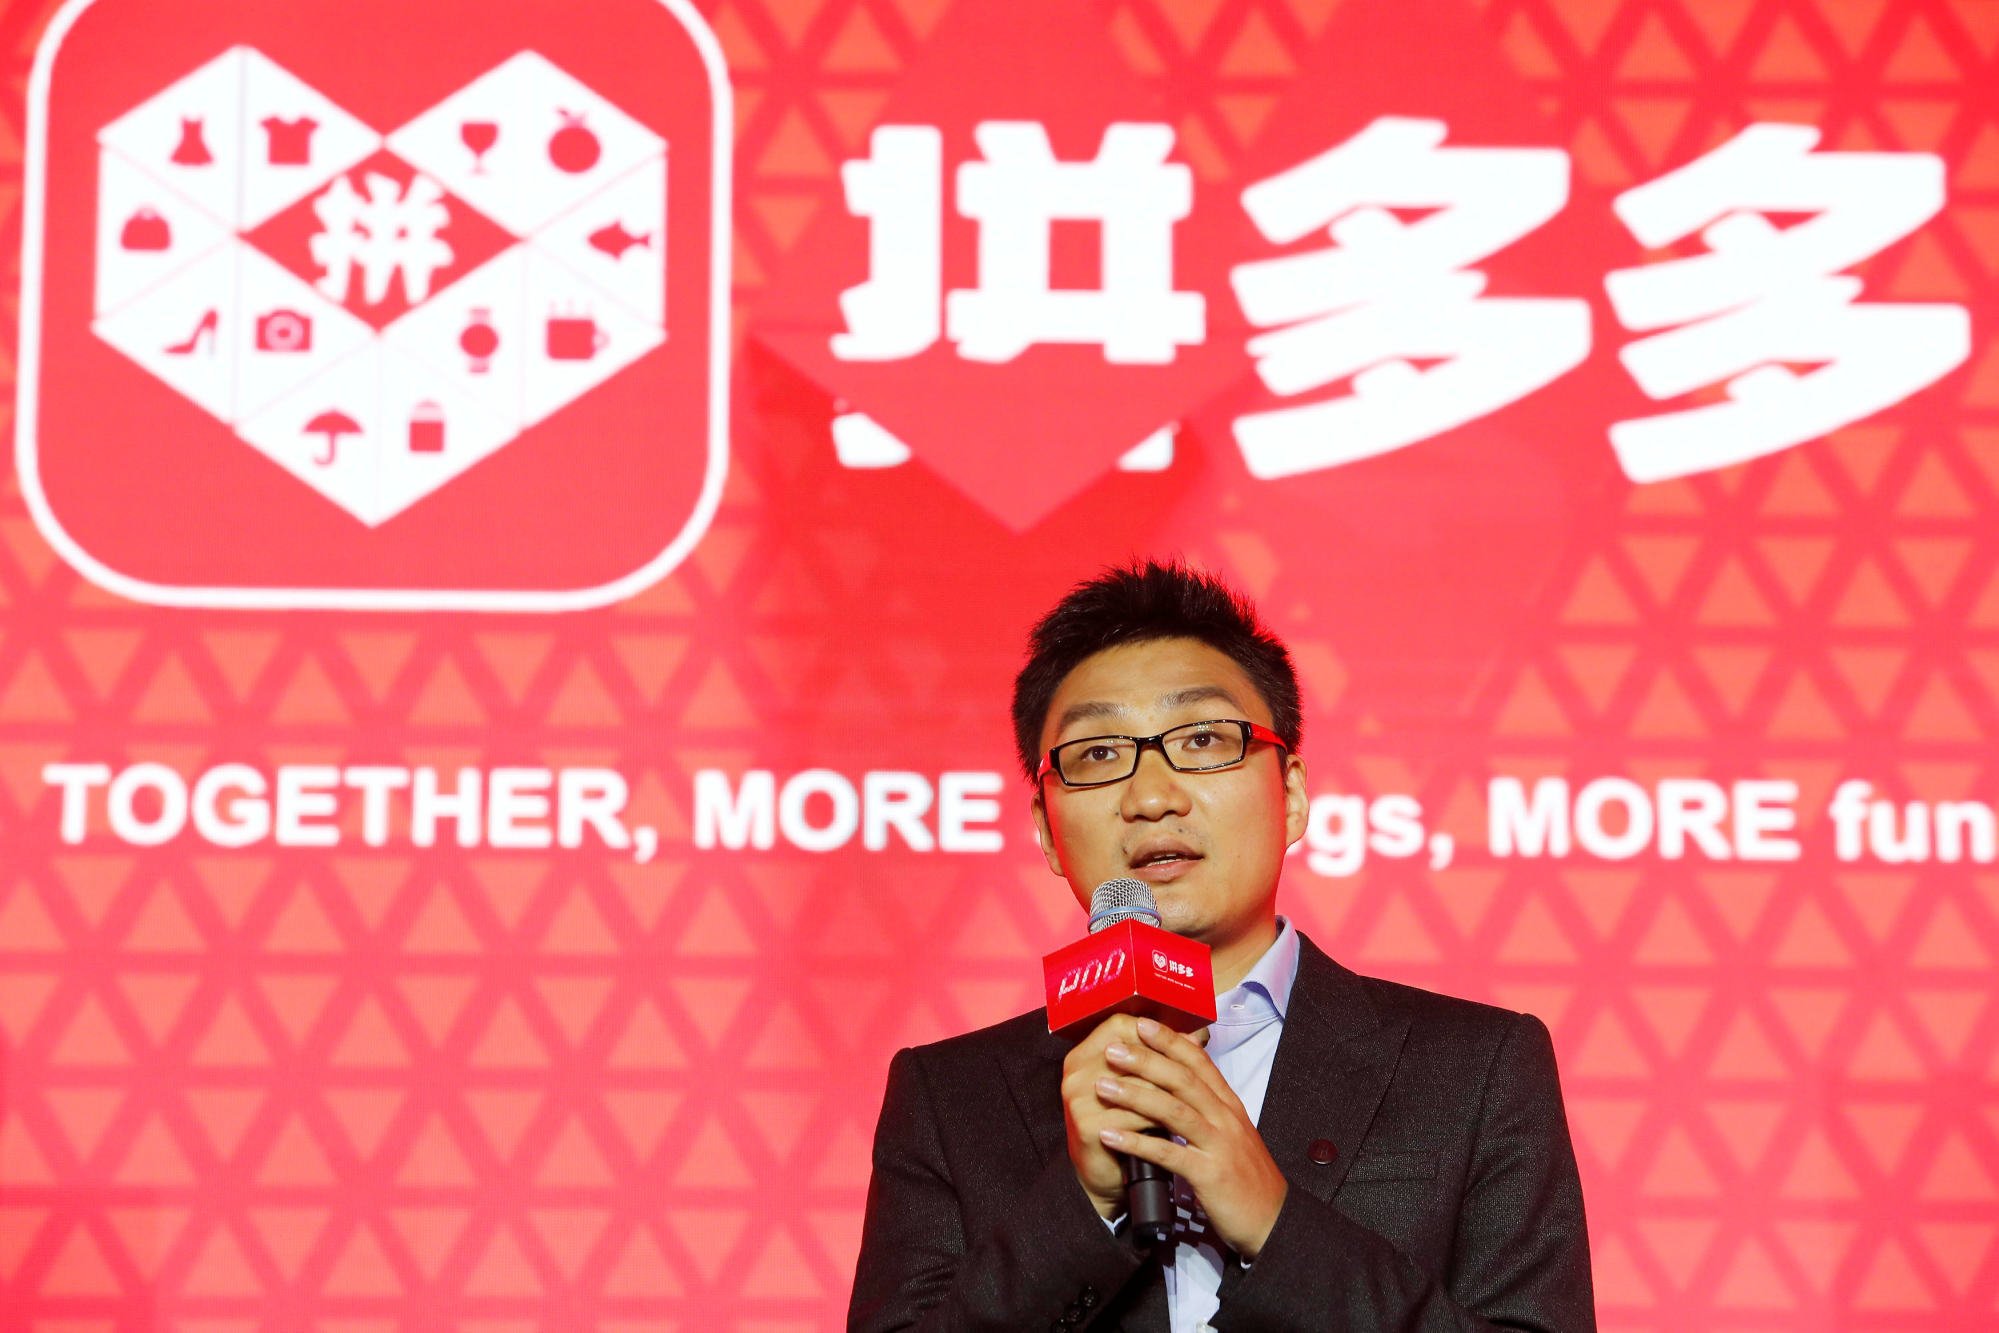 Colin Huang, founder and CEO of the online group discounter Pinduoduo, speaks during the company’s stock trading debut at the Nasdaq Stock Market in New York, during an event in Shanghai on July 26, 2018. Photo: Reuters